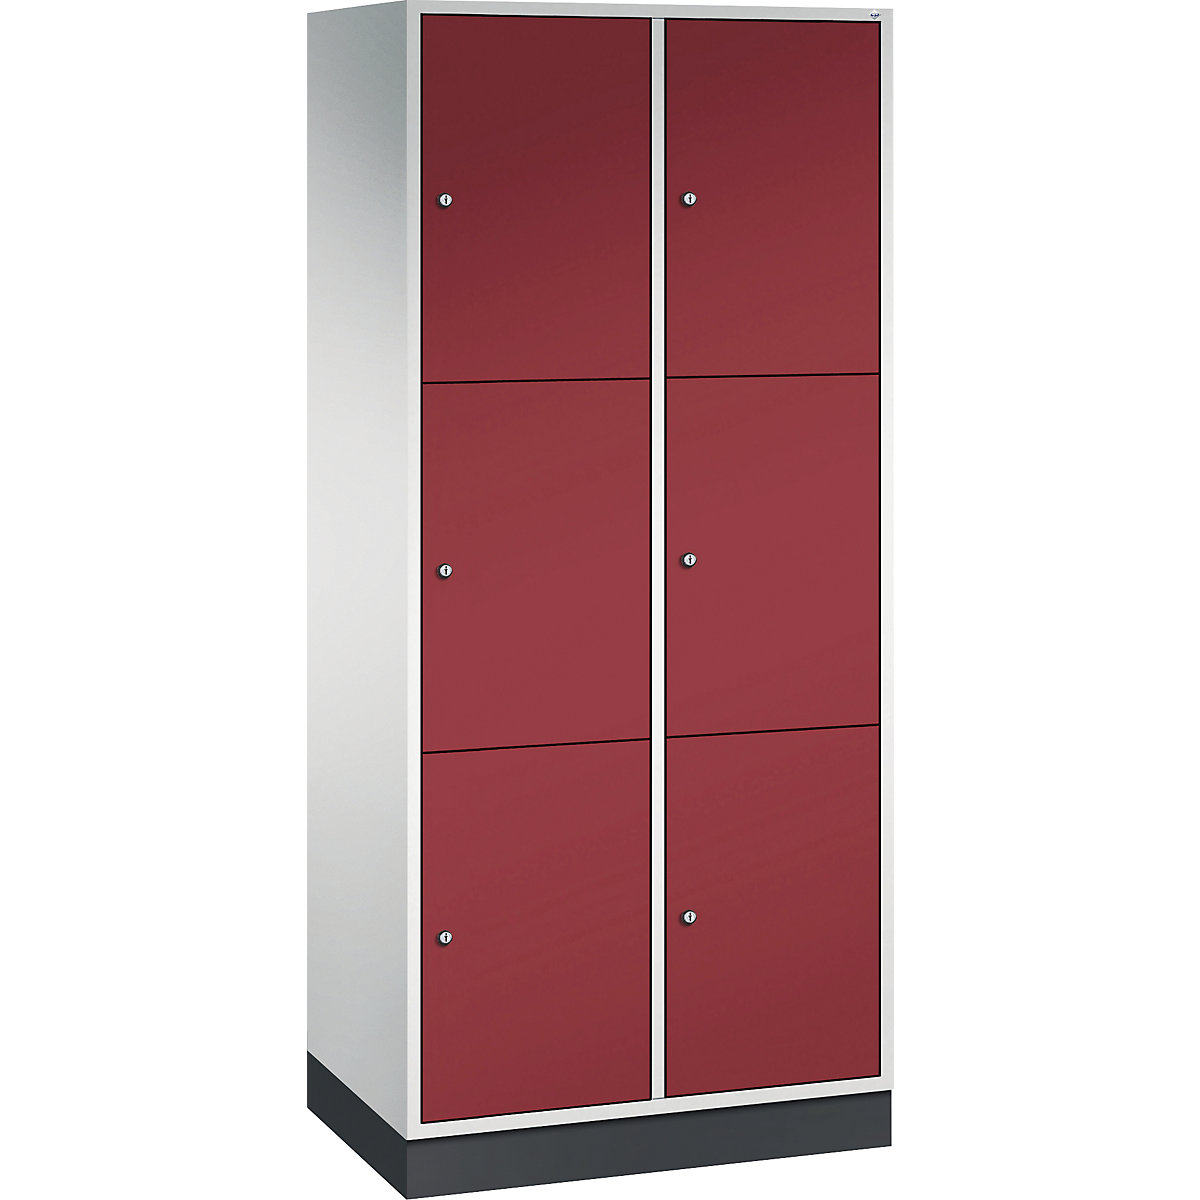 INTRO steel compartment locker, compartment height 580 mm - C+P